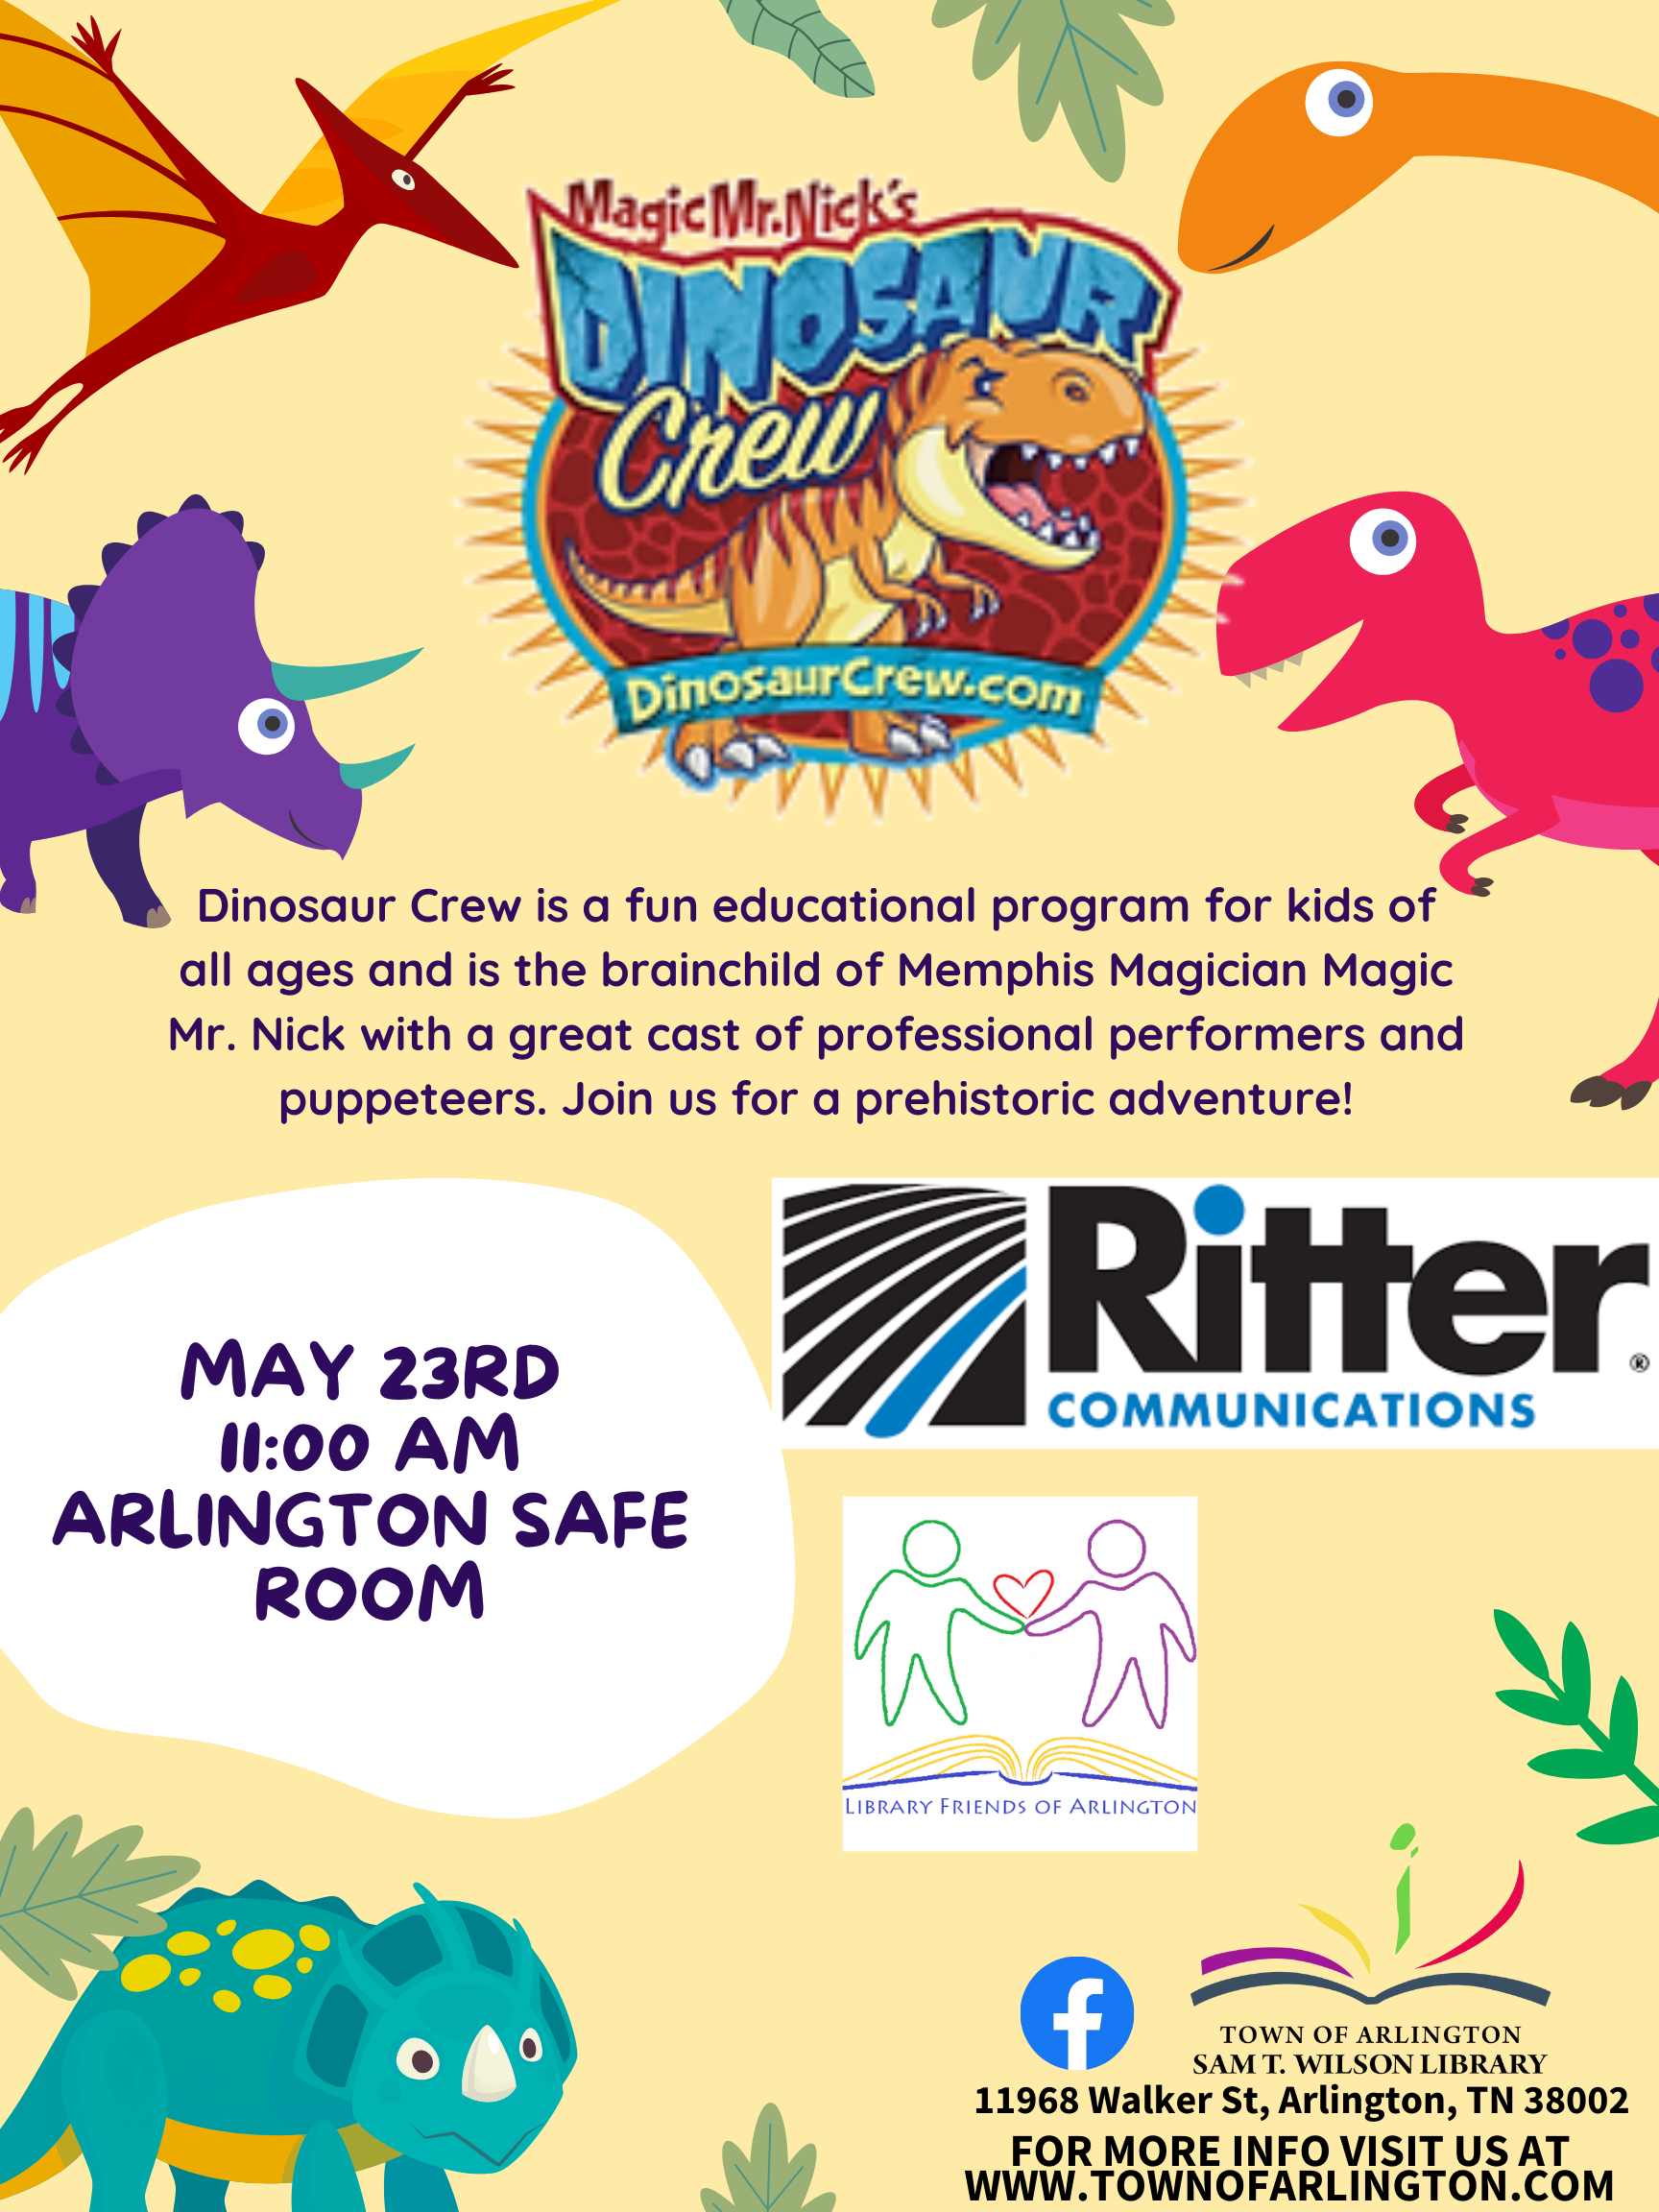 Magic Mr Nick's Dinosaur Crew program on May 23rd at 11am at Arlington Safe Room. includes cast of performers and puppeteers for kids of all ages. 